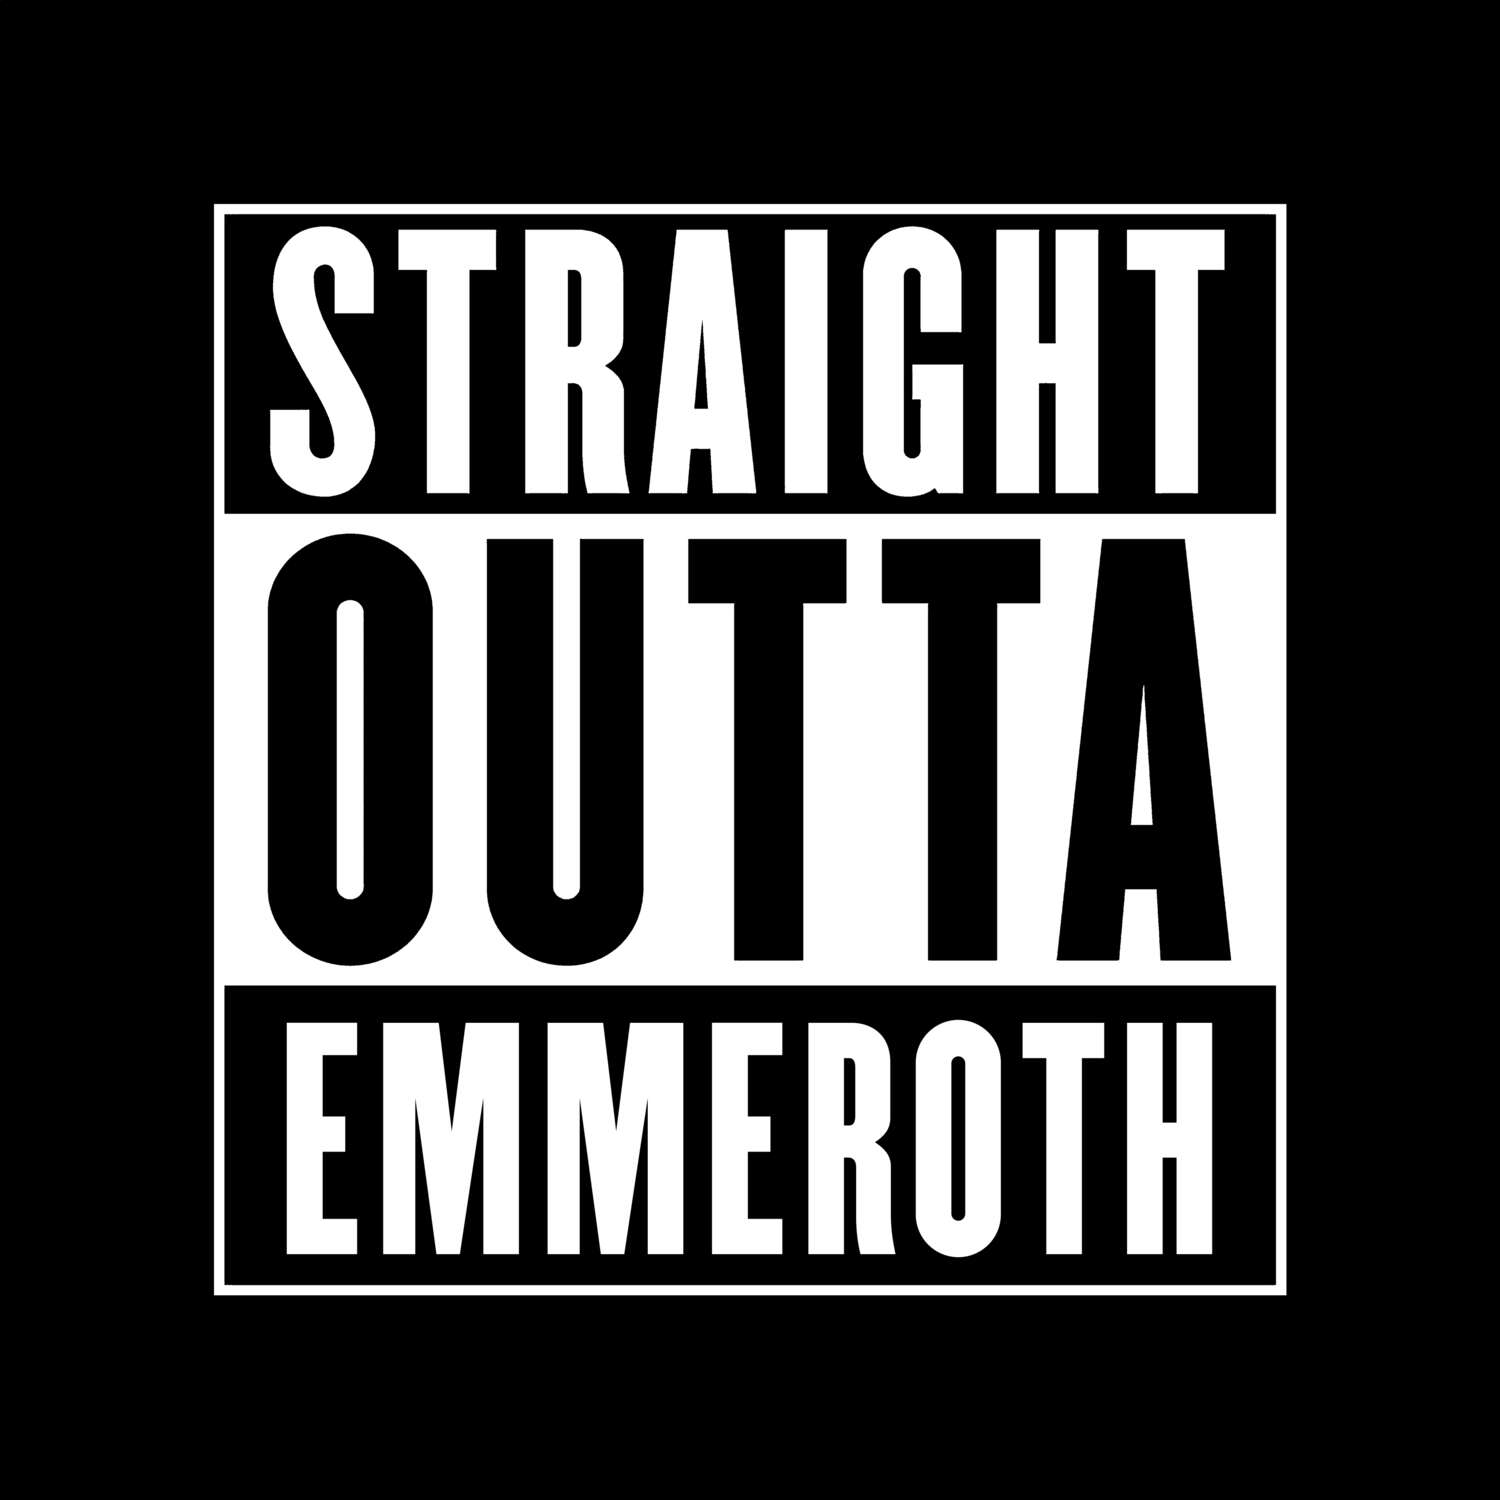 Emmeroth T-Shirt »Straight Outta«